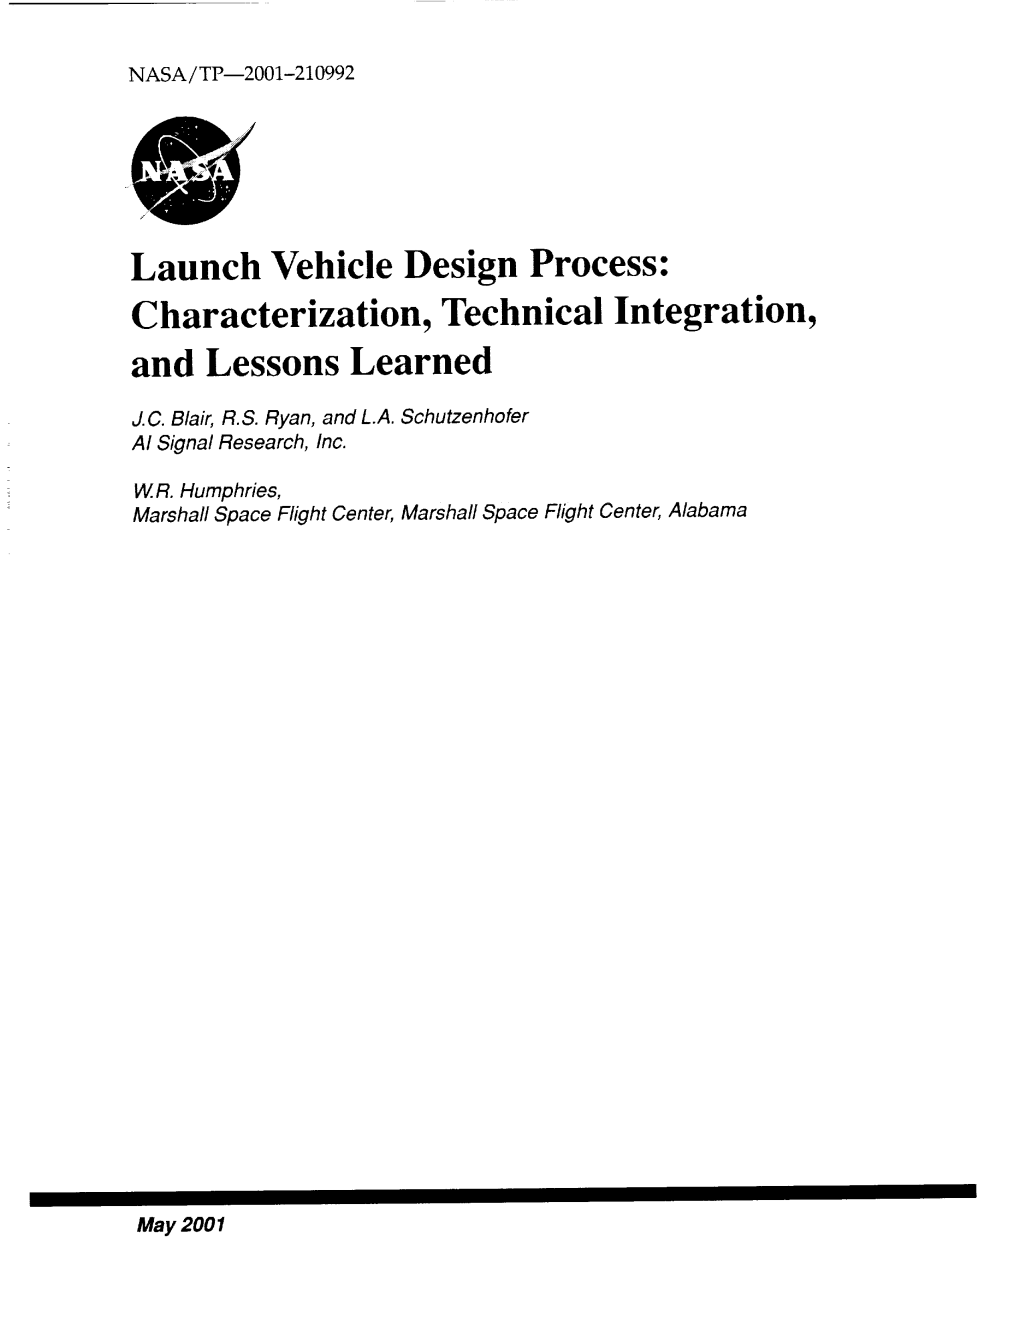 Launch Vehicle Design Process: Characterization, Technical Integration, and Lessons Learned